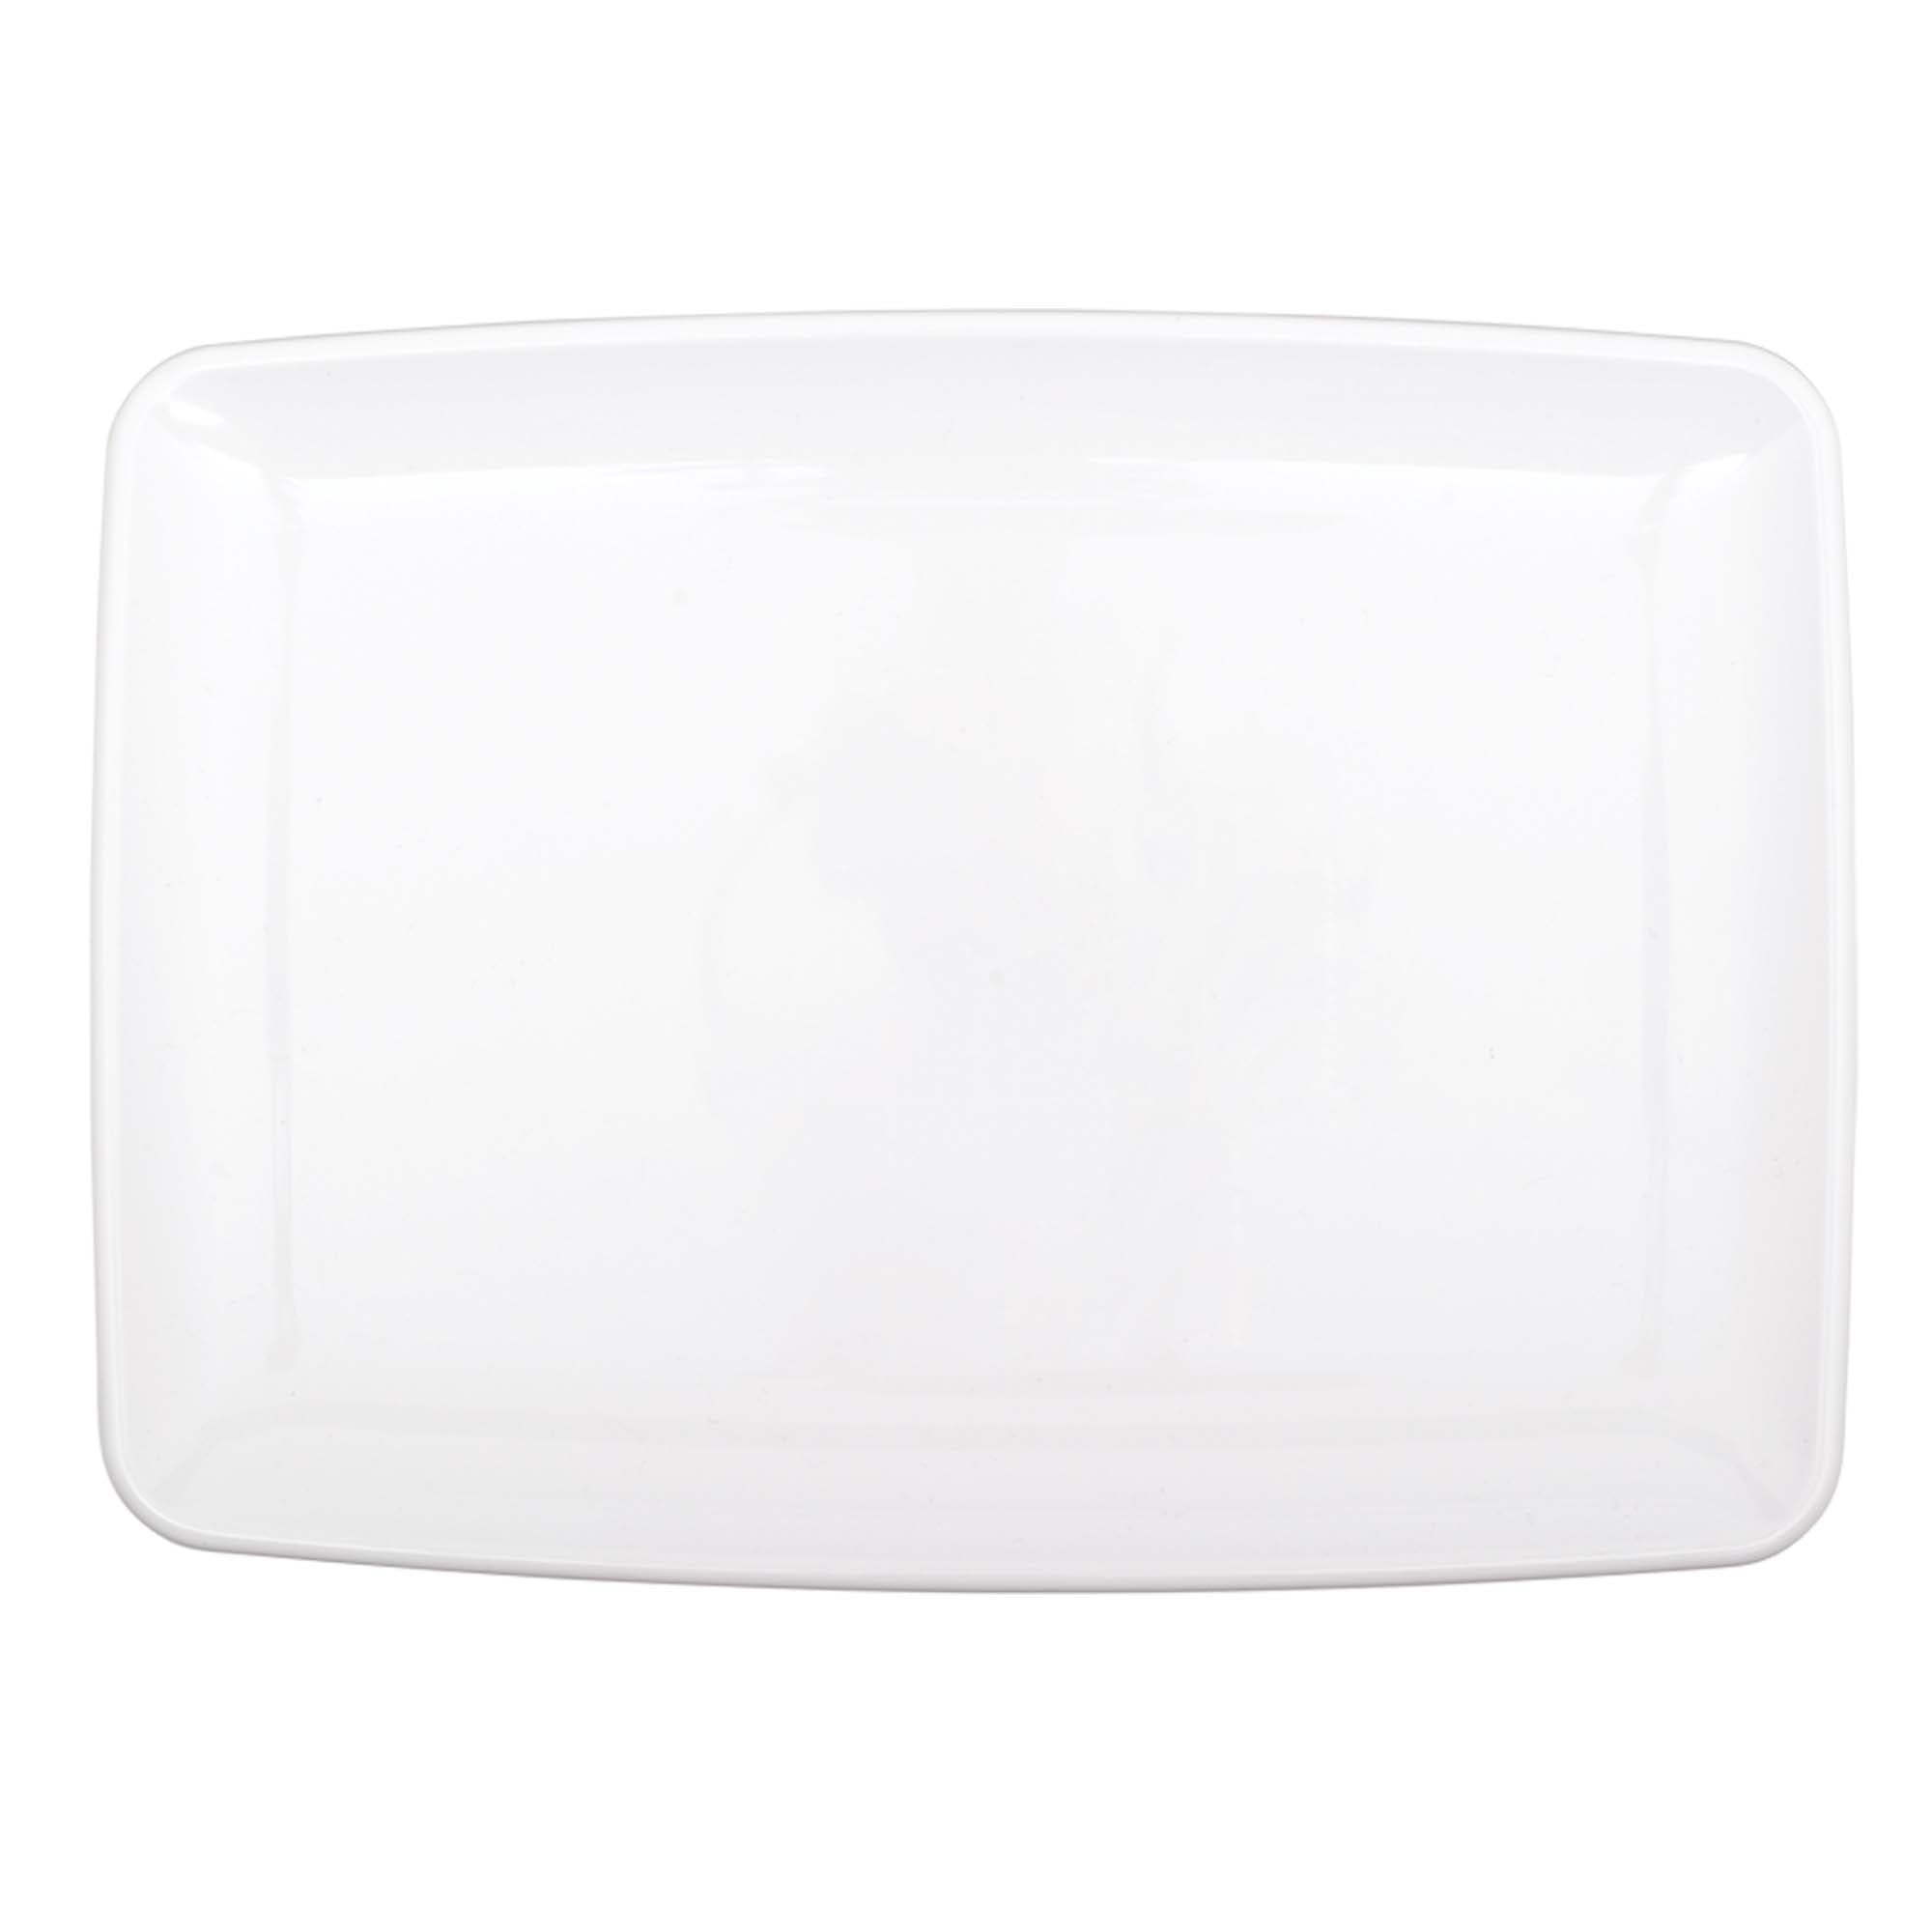 Small Serving Tray  Plastic  Frosty White  8.5x11in
